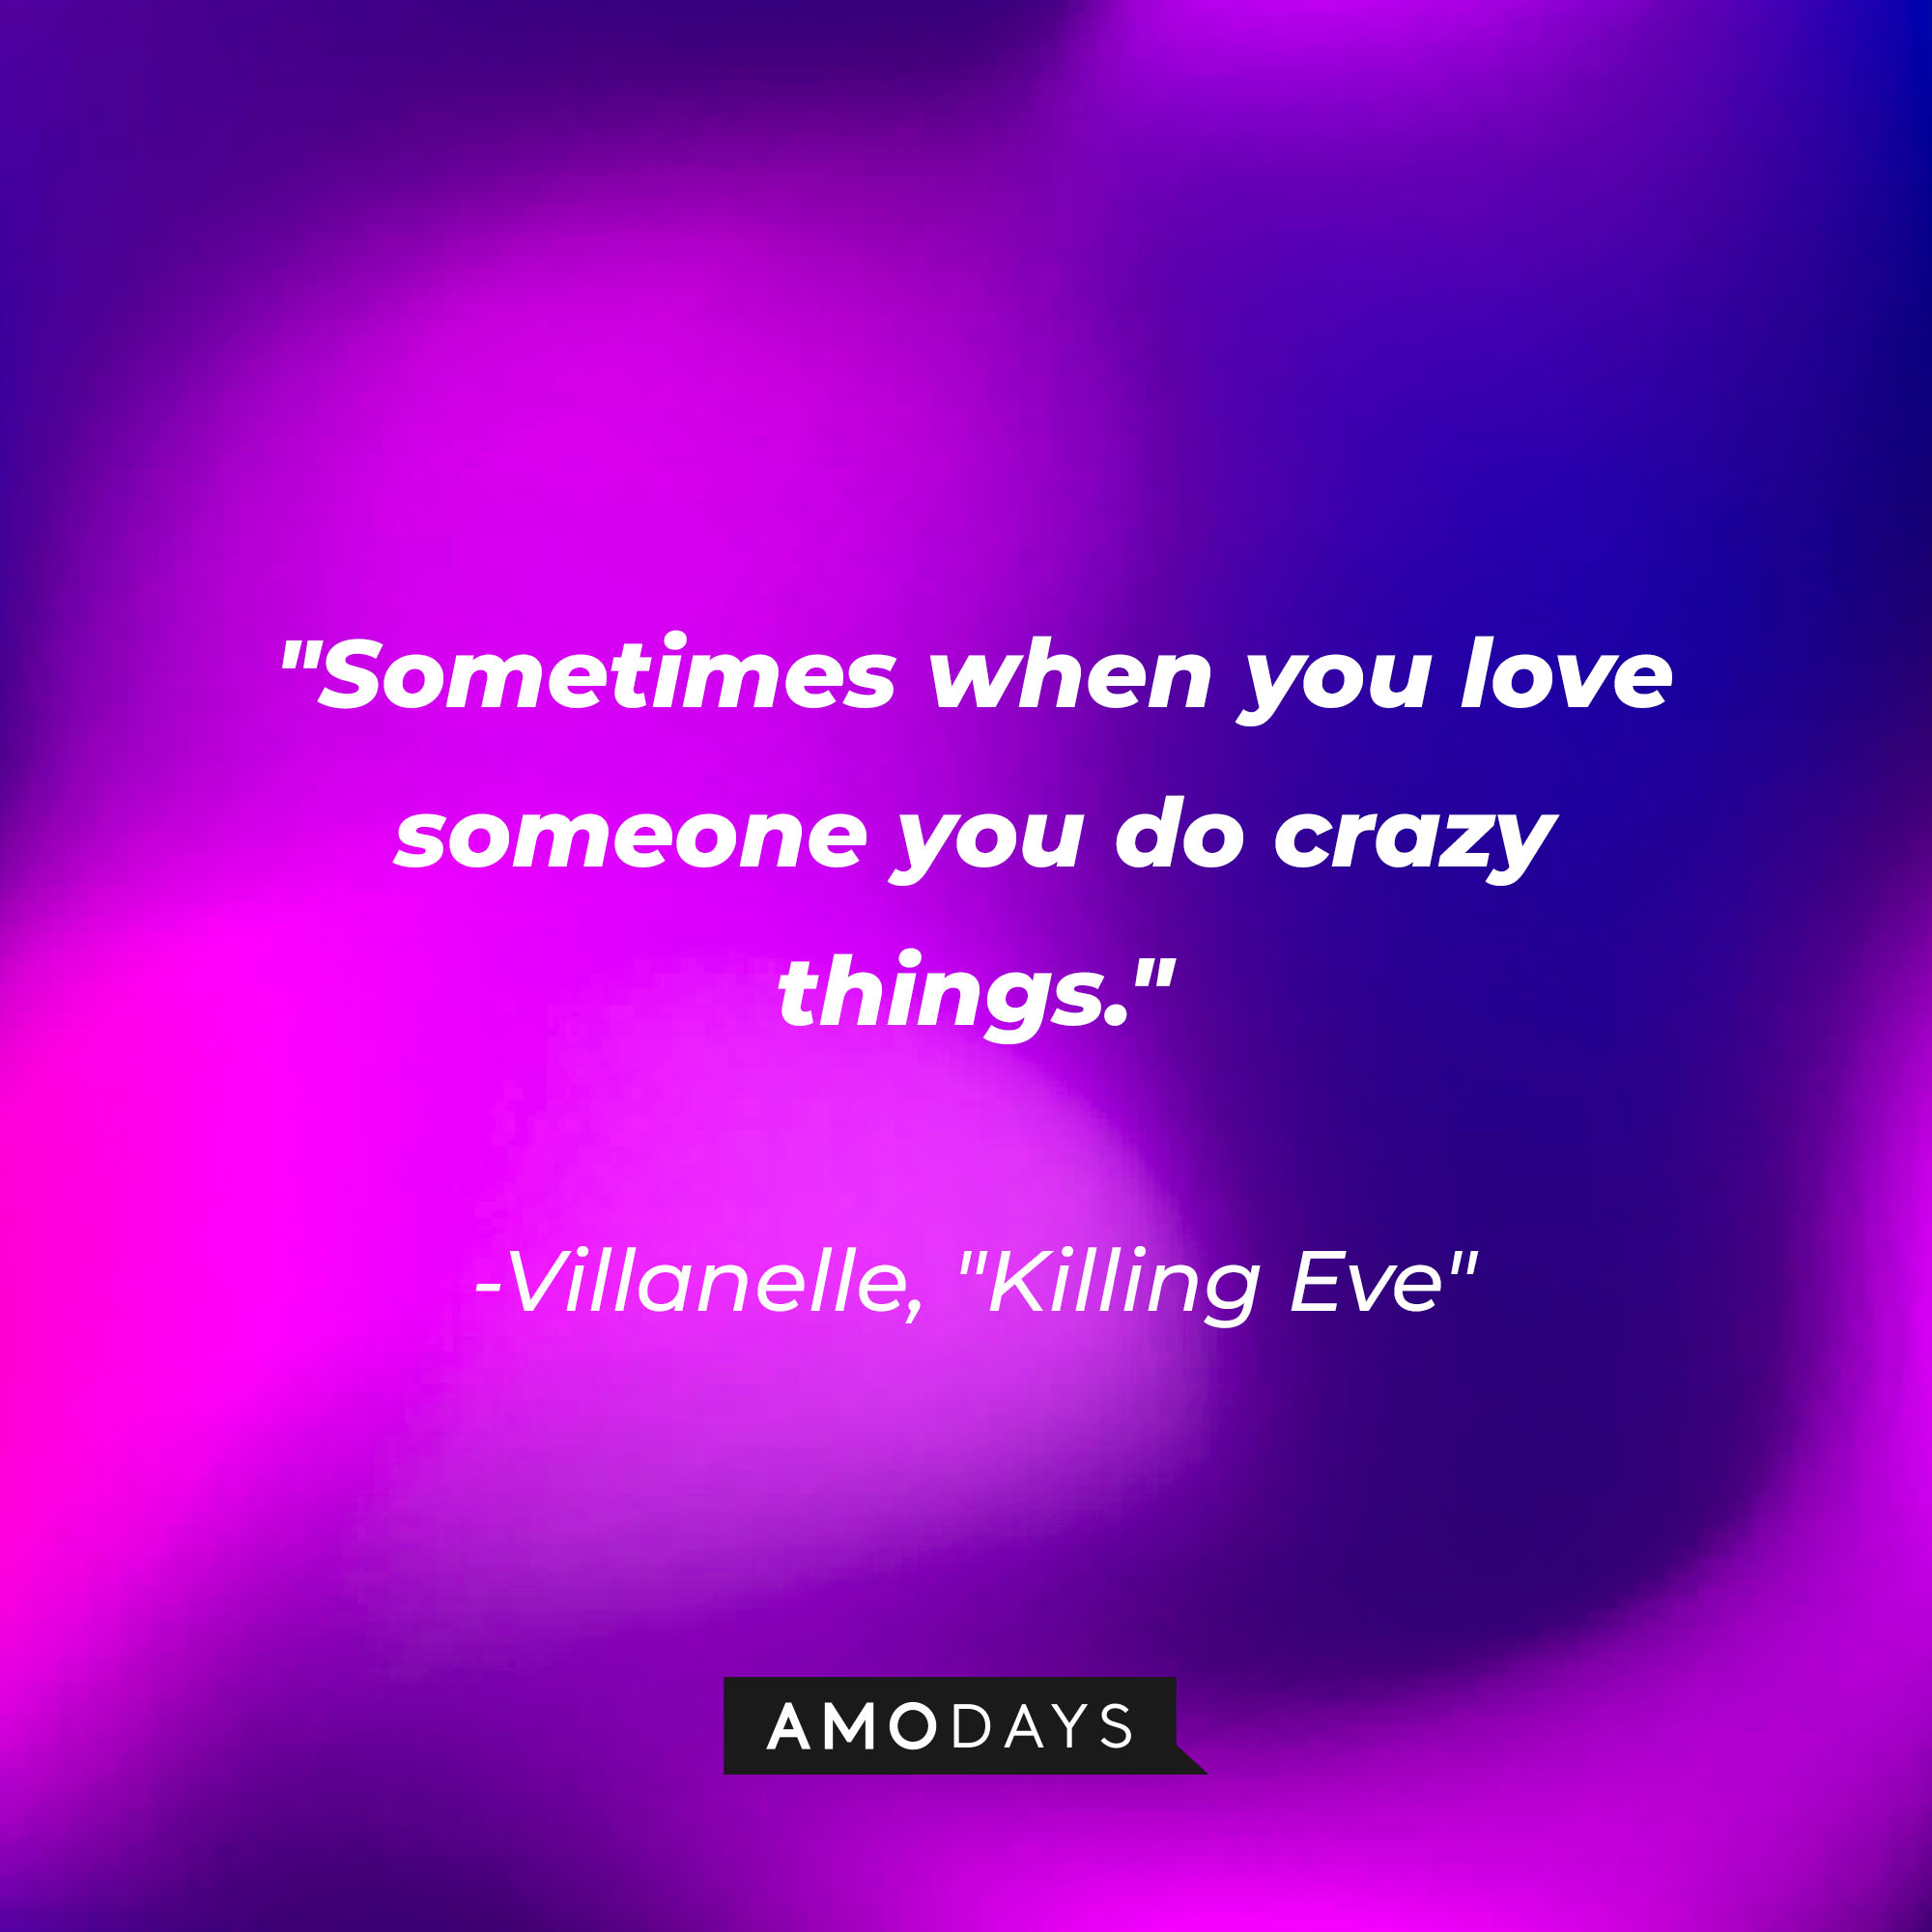 Villanelle's quote: "Sometimes when you love someone you do crazy things." | Source: Amodays